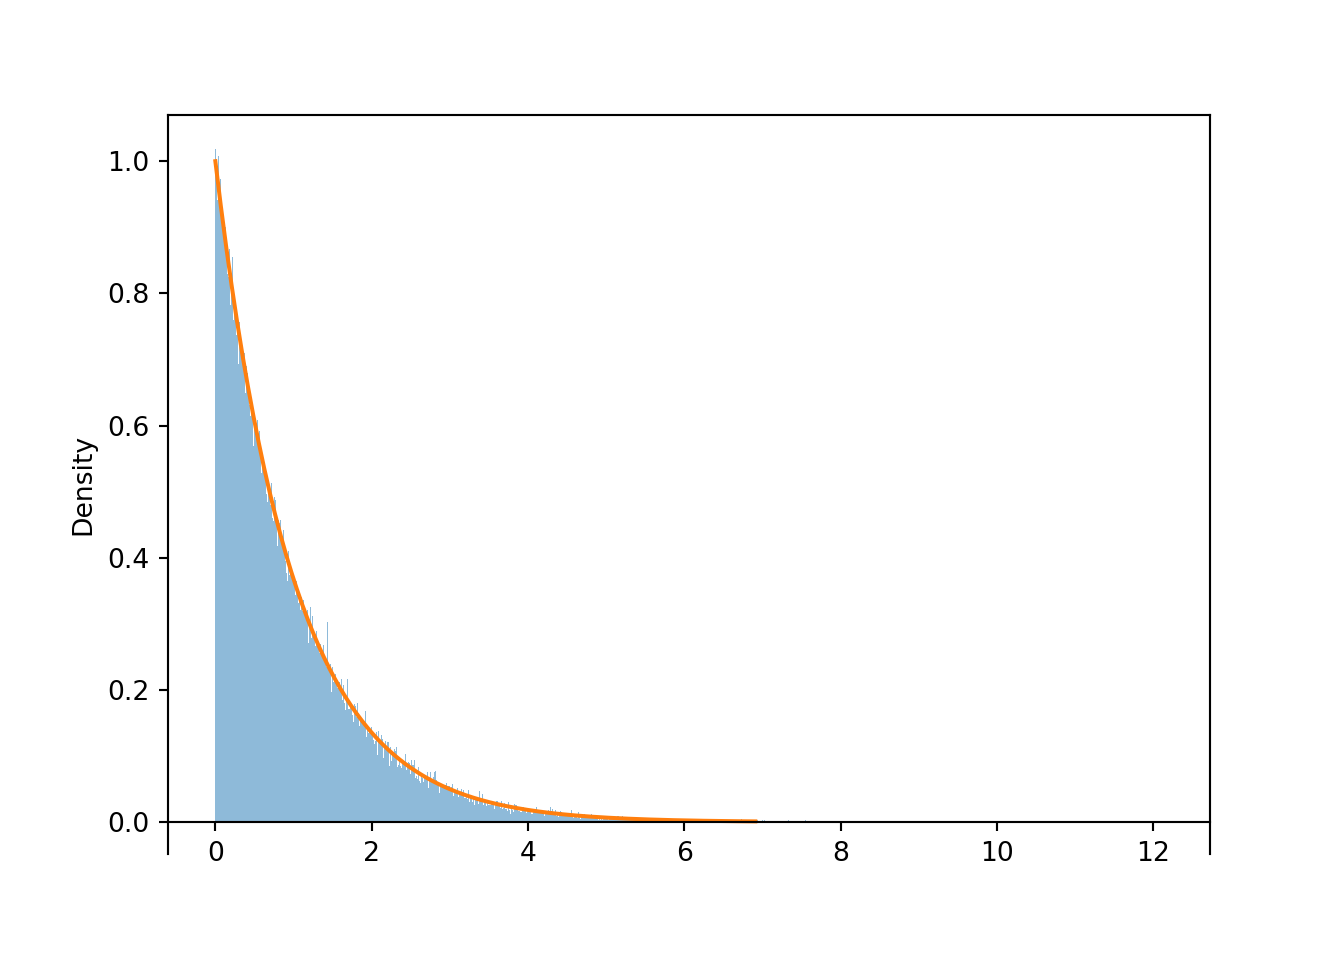 A histogram of simulated values of \(X = -\log(1-U)\), where \(U\) has a Uniform(0, 1) distribution. With many simulated values and very fine bins, the shape of the histogram is well approximated by a smooth curve, called the “Exponential(1) density”.